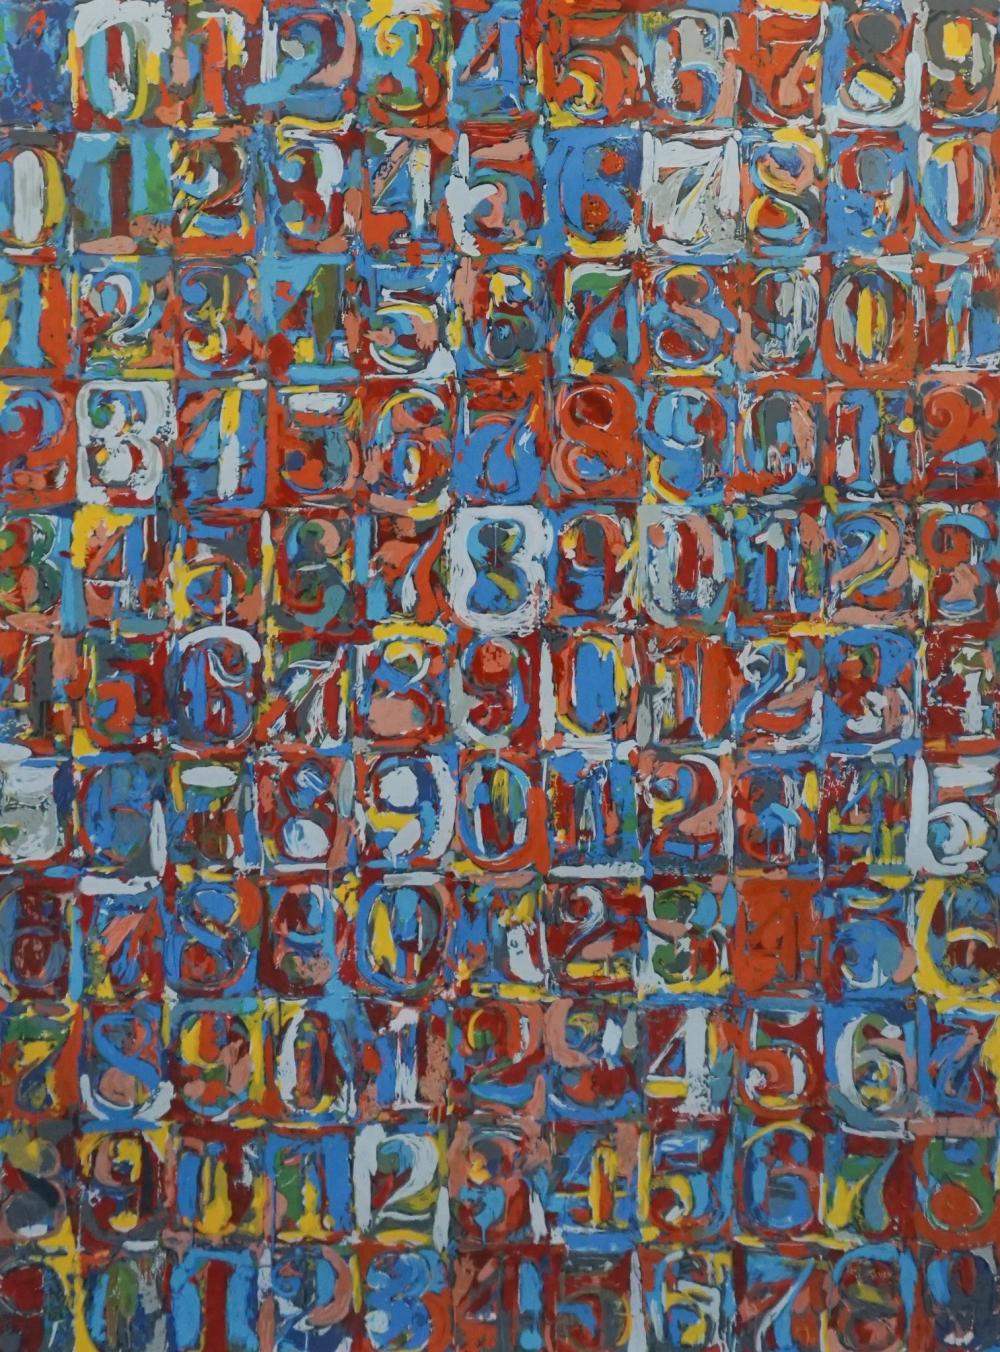 AFTER JASPER JOHNS NUMBERS IN 2e4eff